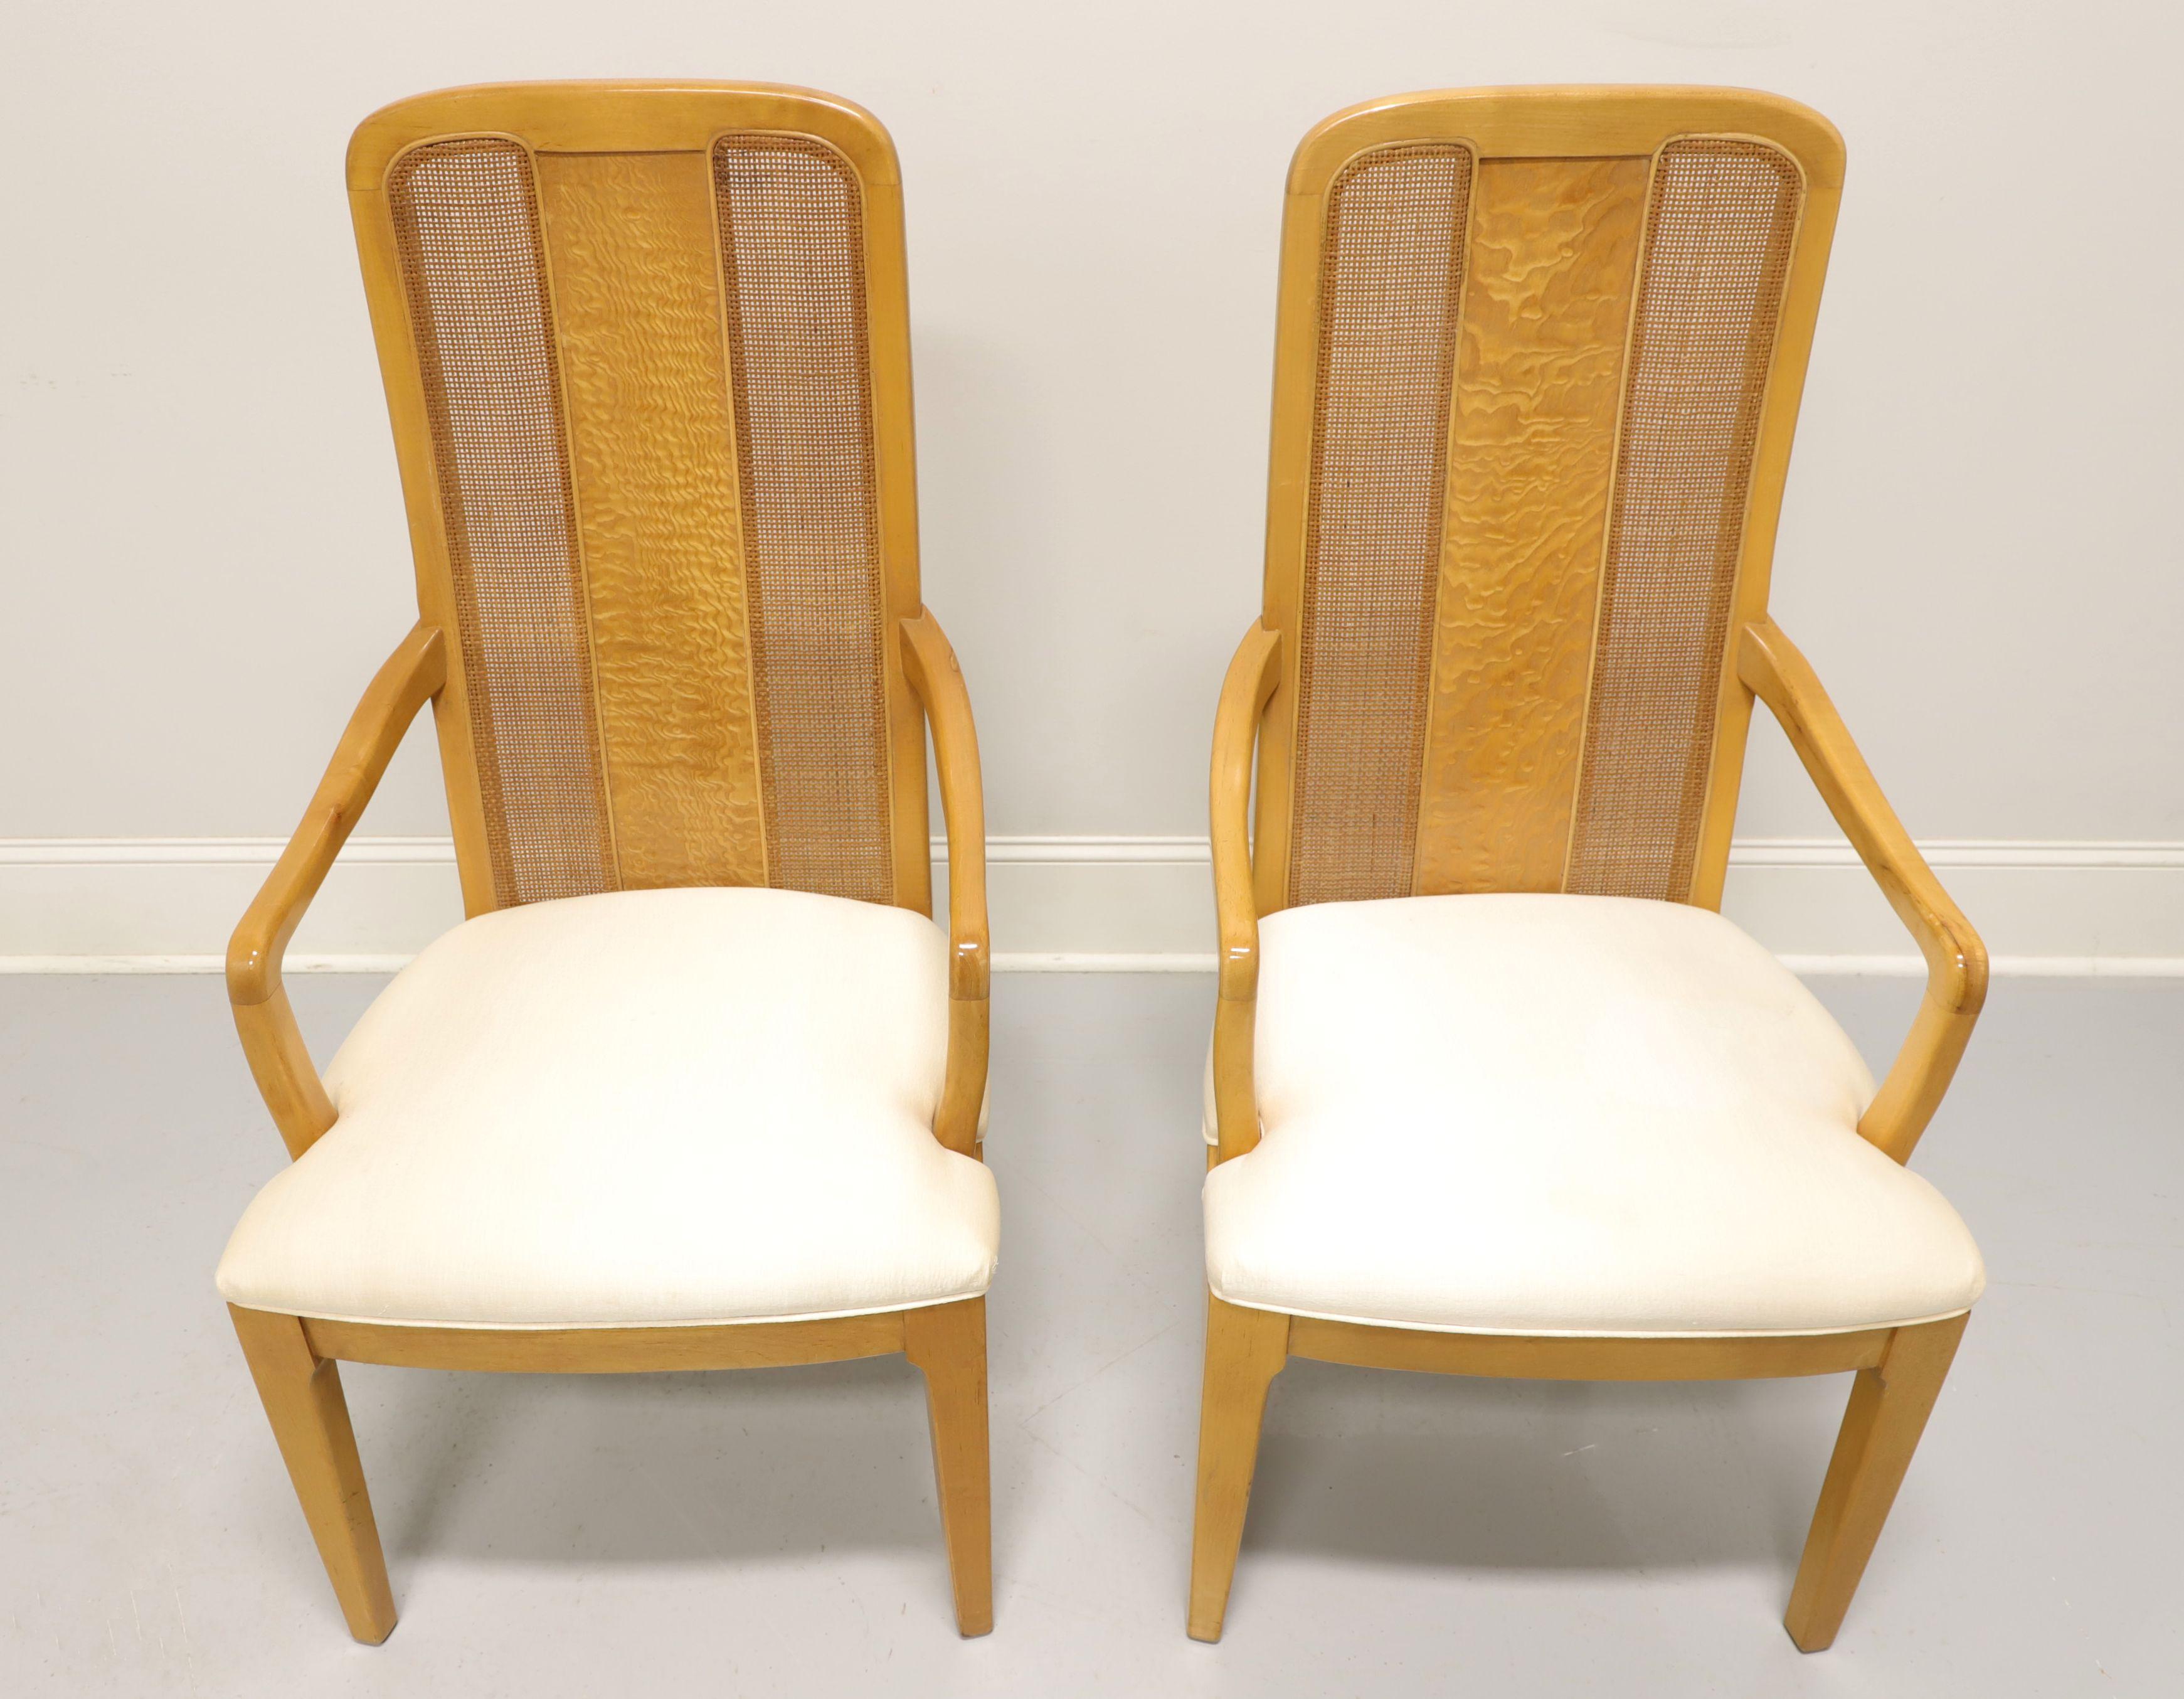 A pair of Contemporary style dining armchairs by Bernhardt Furniture. Maple with burl & cane back rest, rounded arms, neutral cream color fabric upholstered seat and straight front legs. Made in North Carolina, USA, in the late 20th